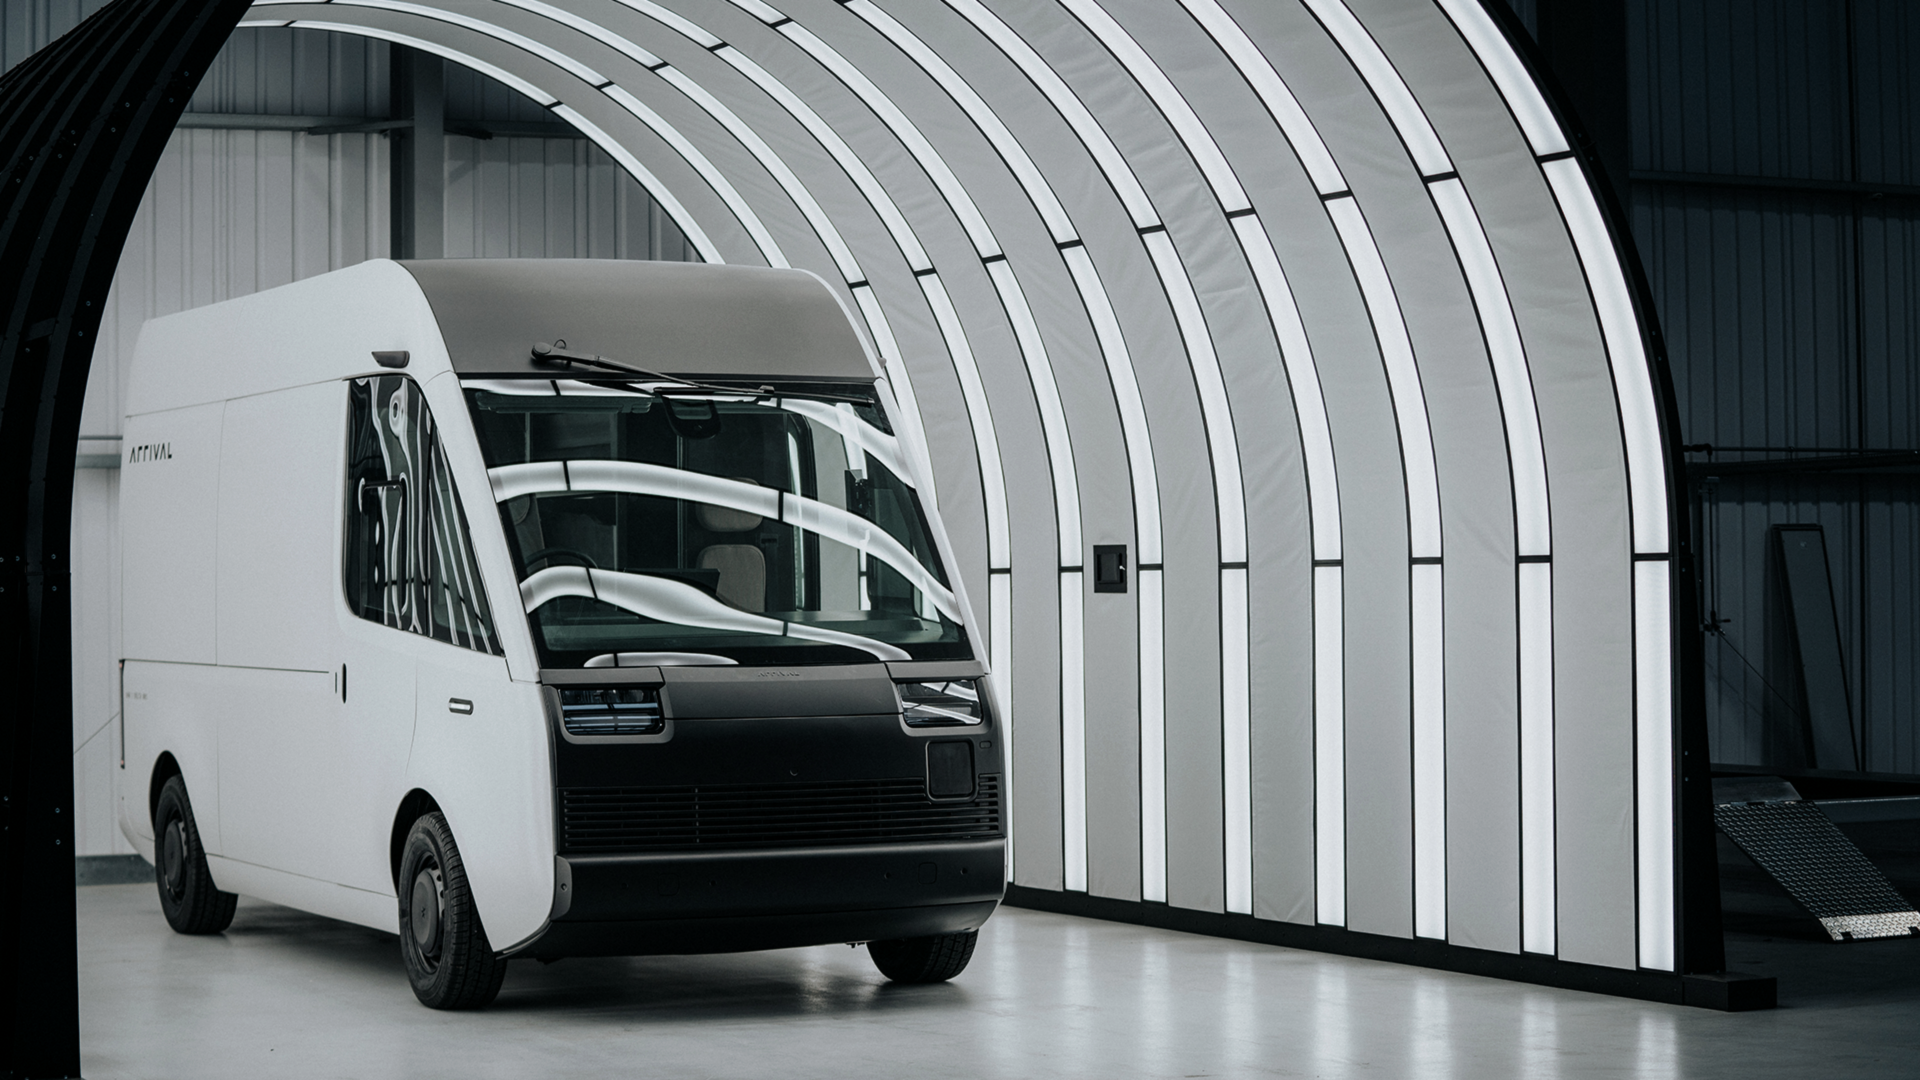 Arrival's innovative electric delivery van